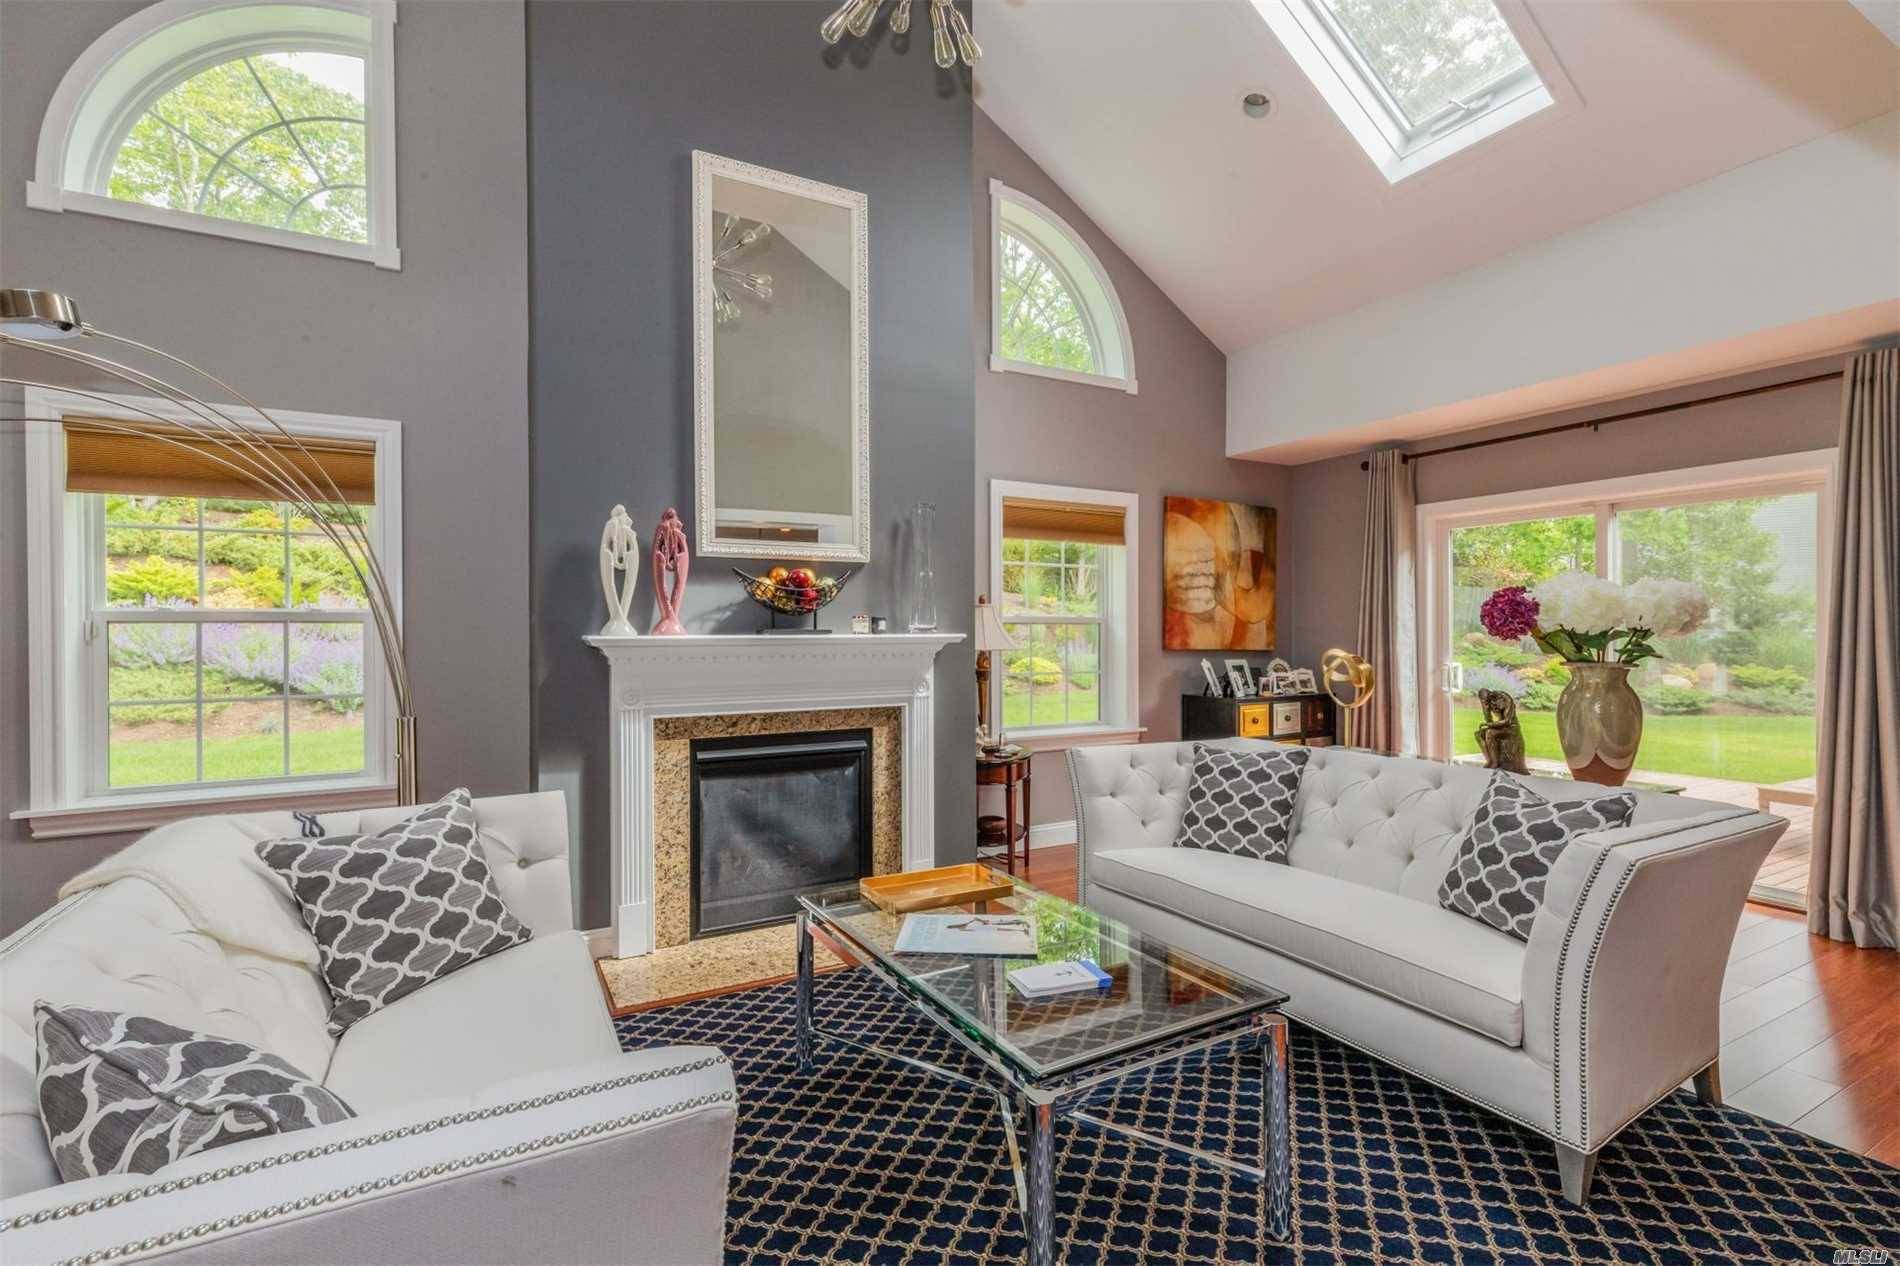 Sag Harbor Village Decor House With 3 Bedrooms, 2,5 Bathrooms Is A Great Place For Summer Rental.